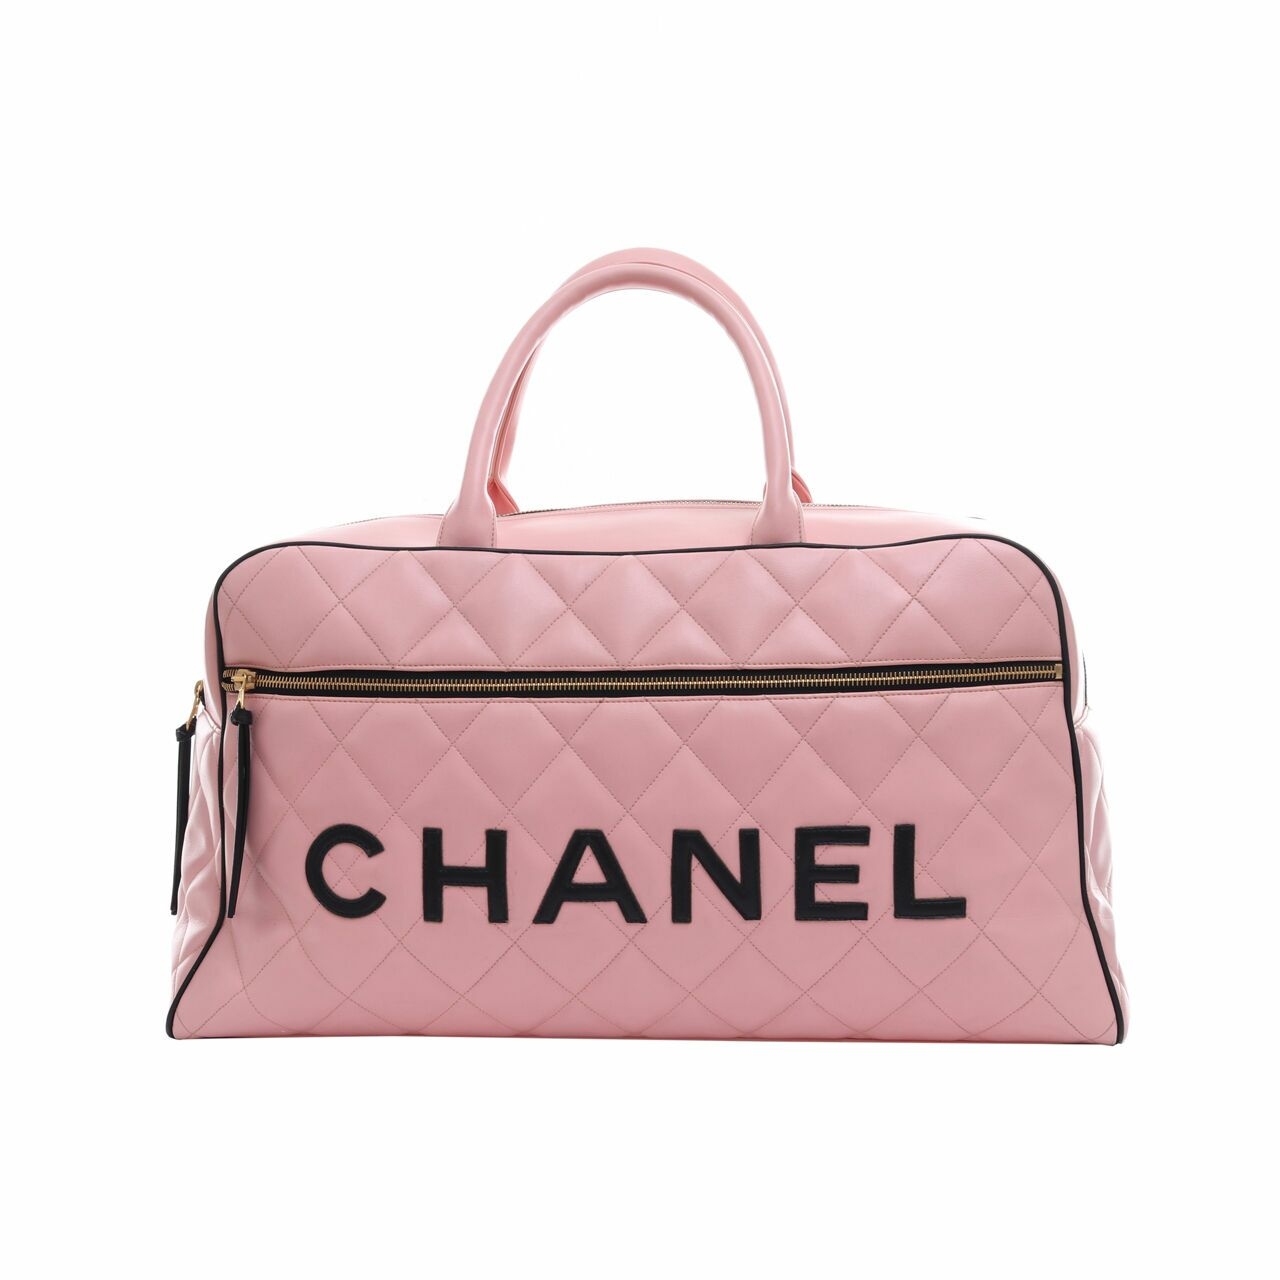 Chanel Tote Duffle Timeless Rare Duffel Overnight Pink Travel Bag